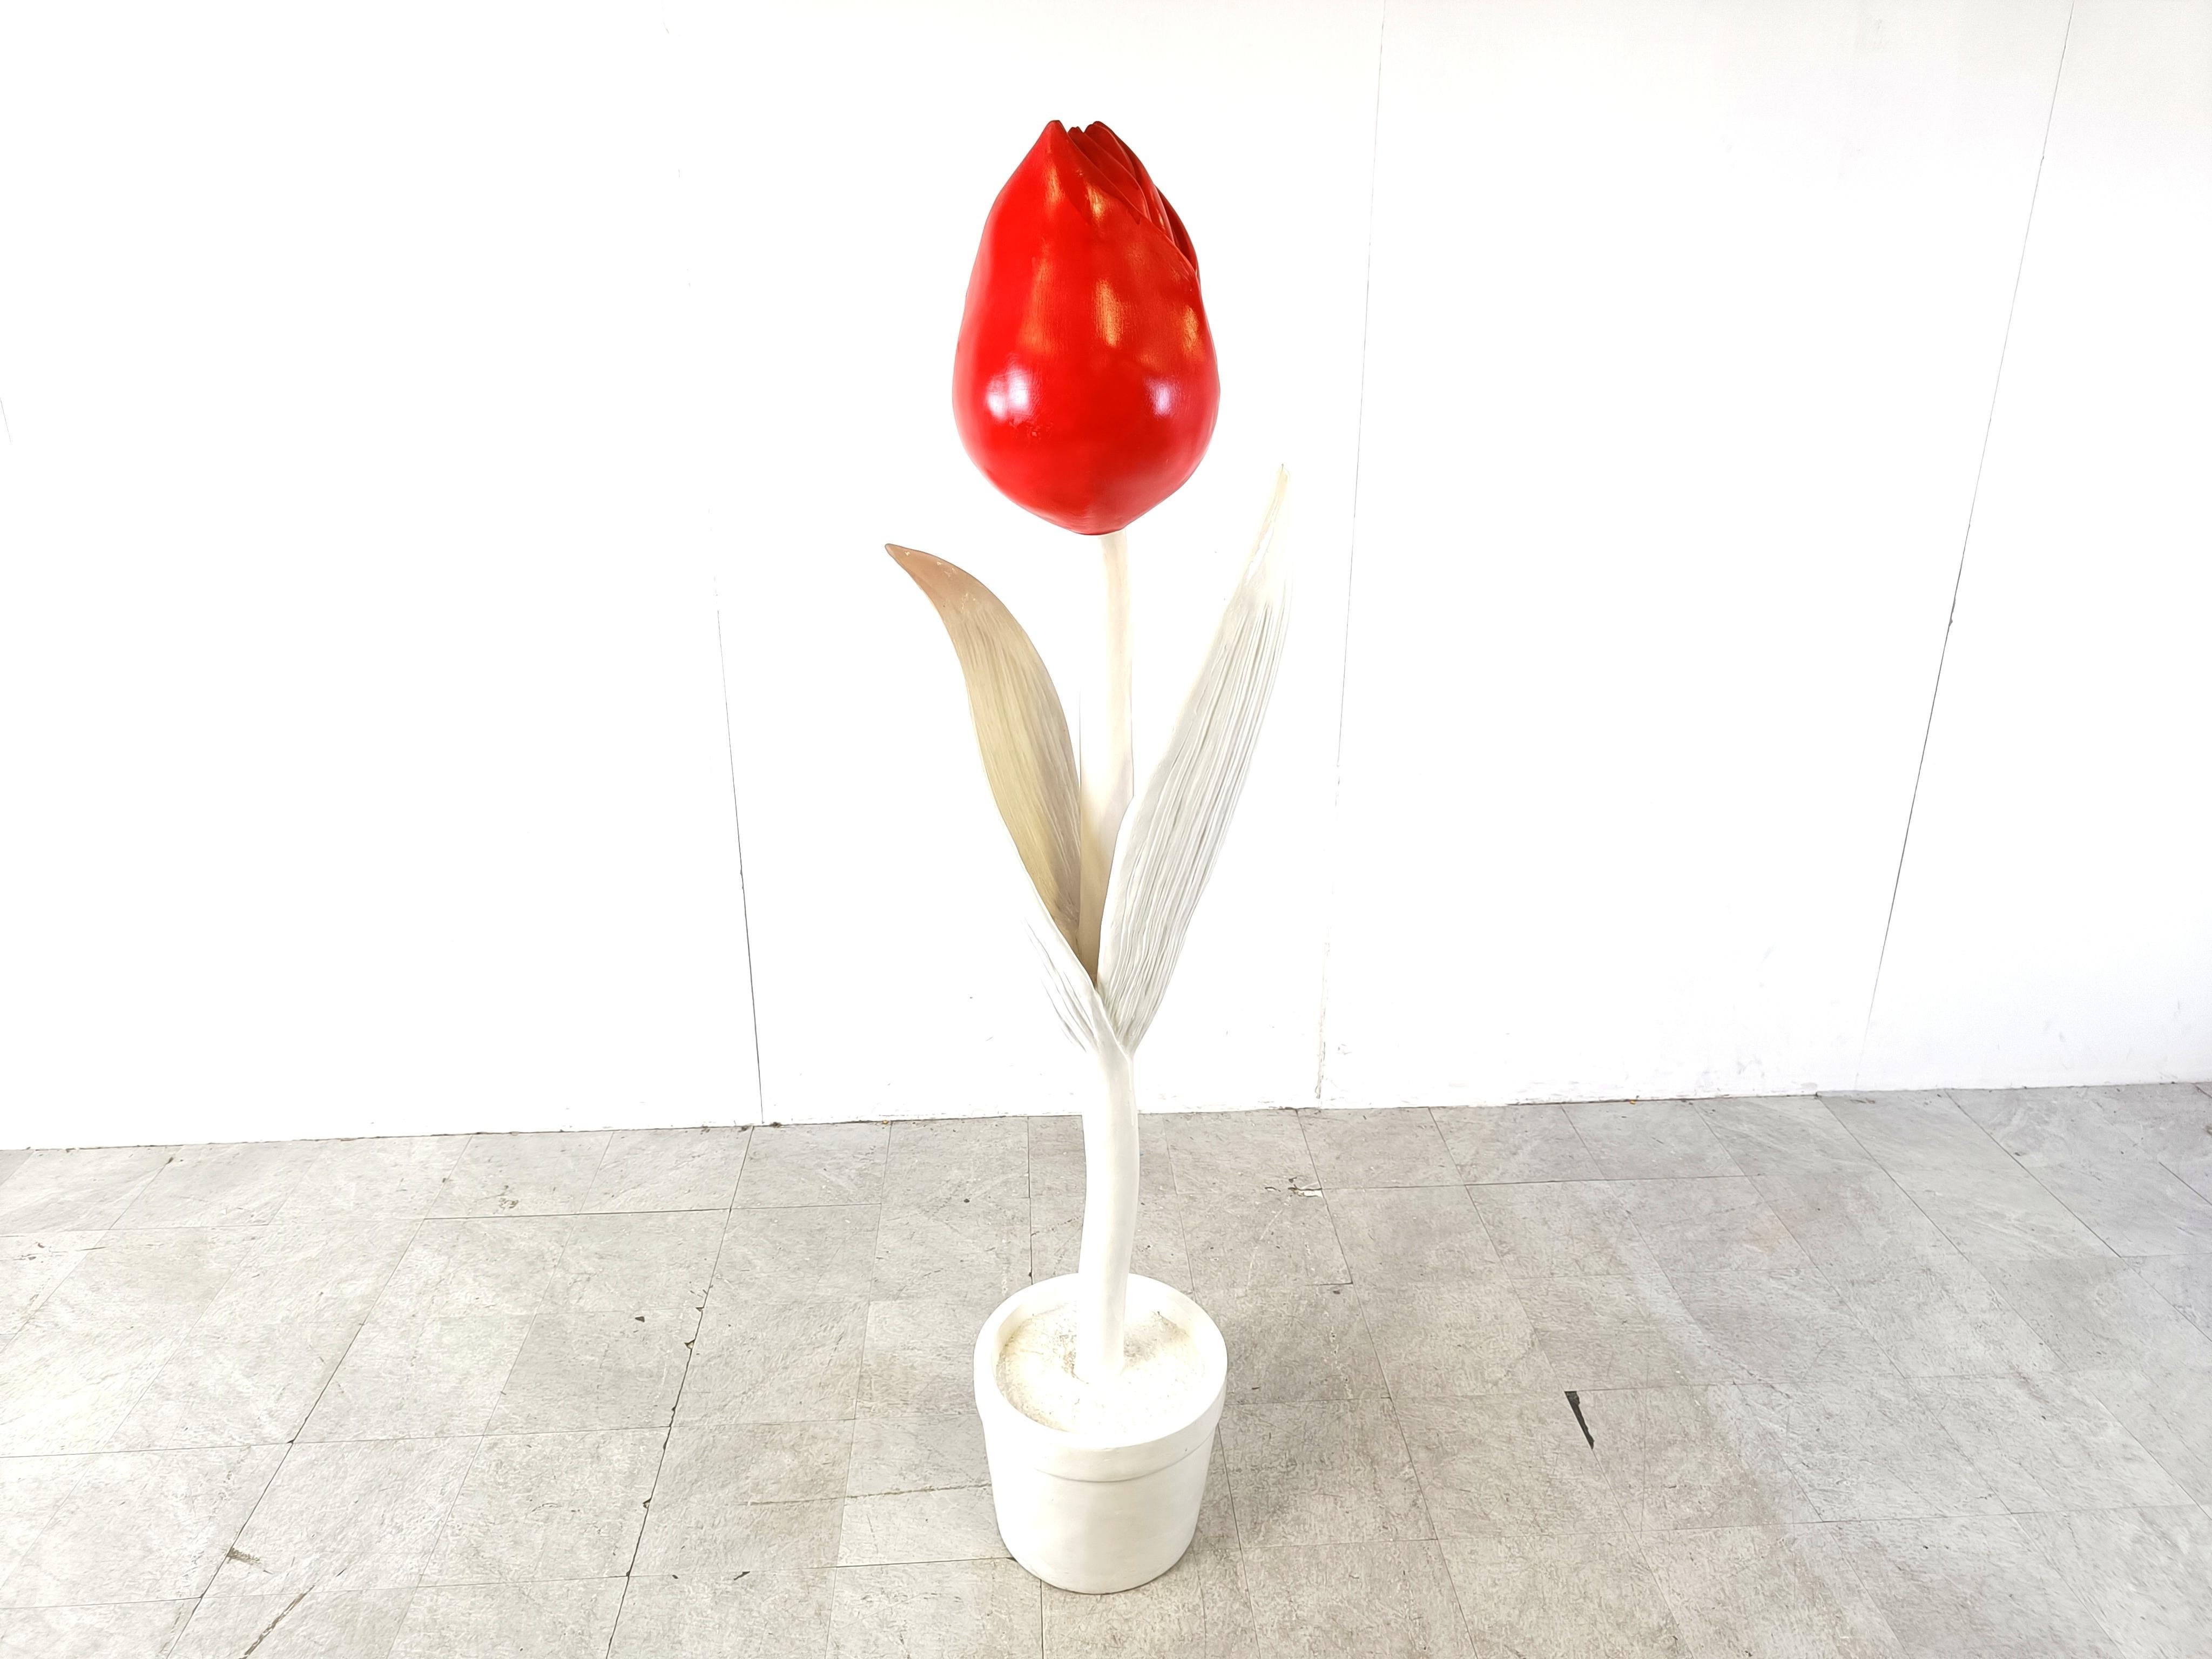 Very large decorative polyester tulip sculpture.

Eye catching and decorative piece

Early 2000s, flower shop display

Good condition

Ref.: 642725
